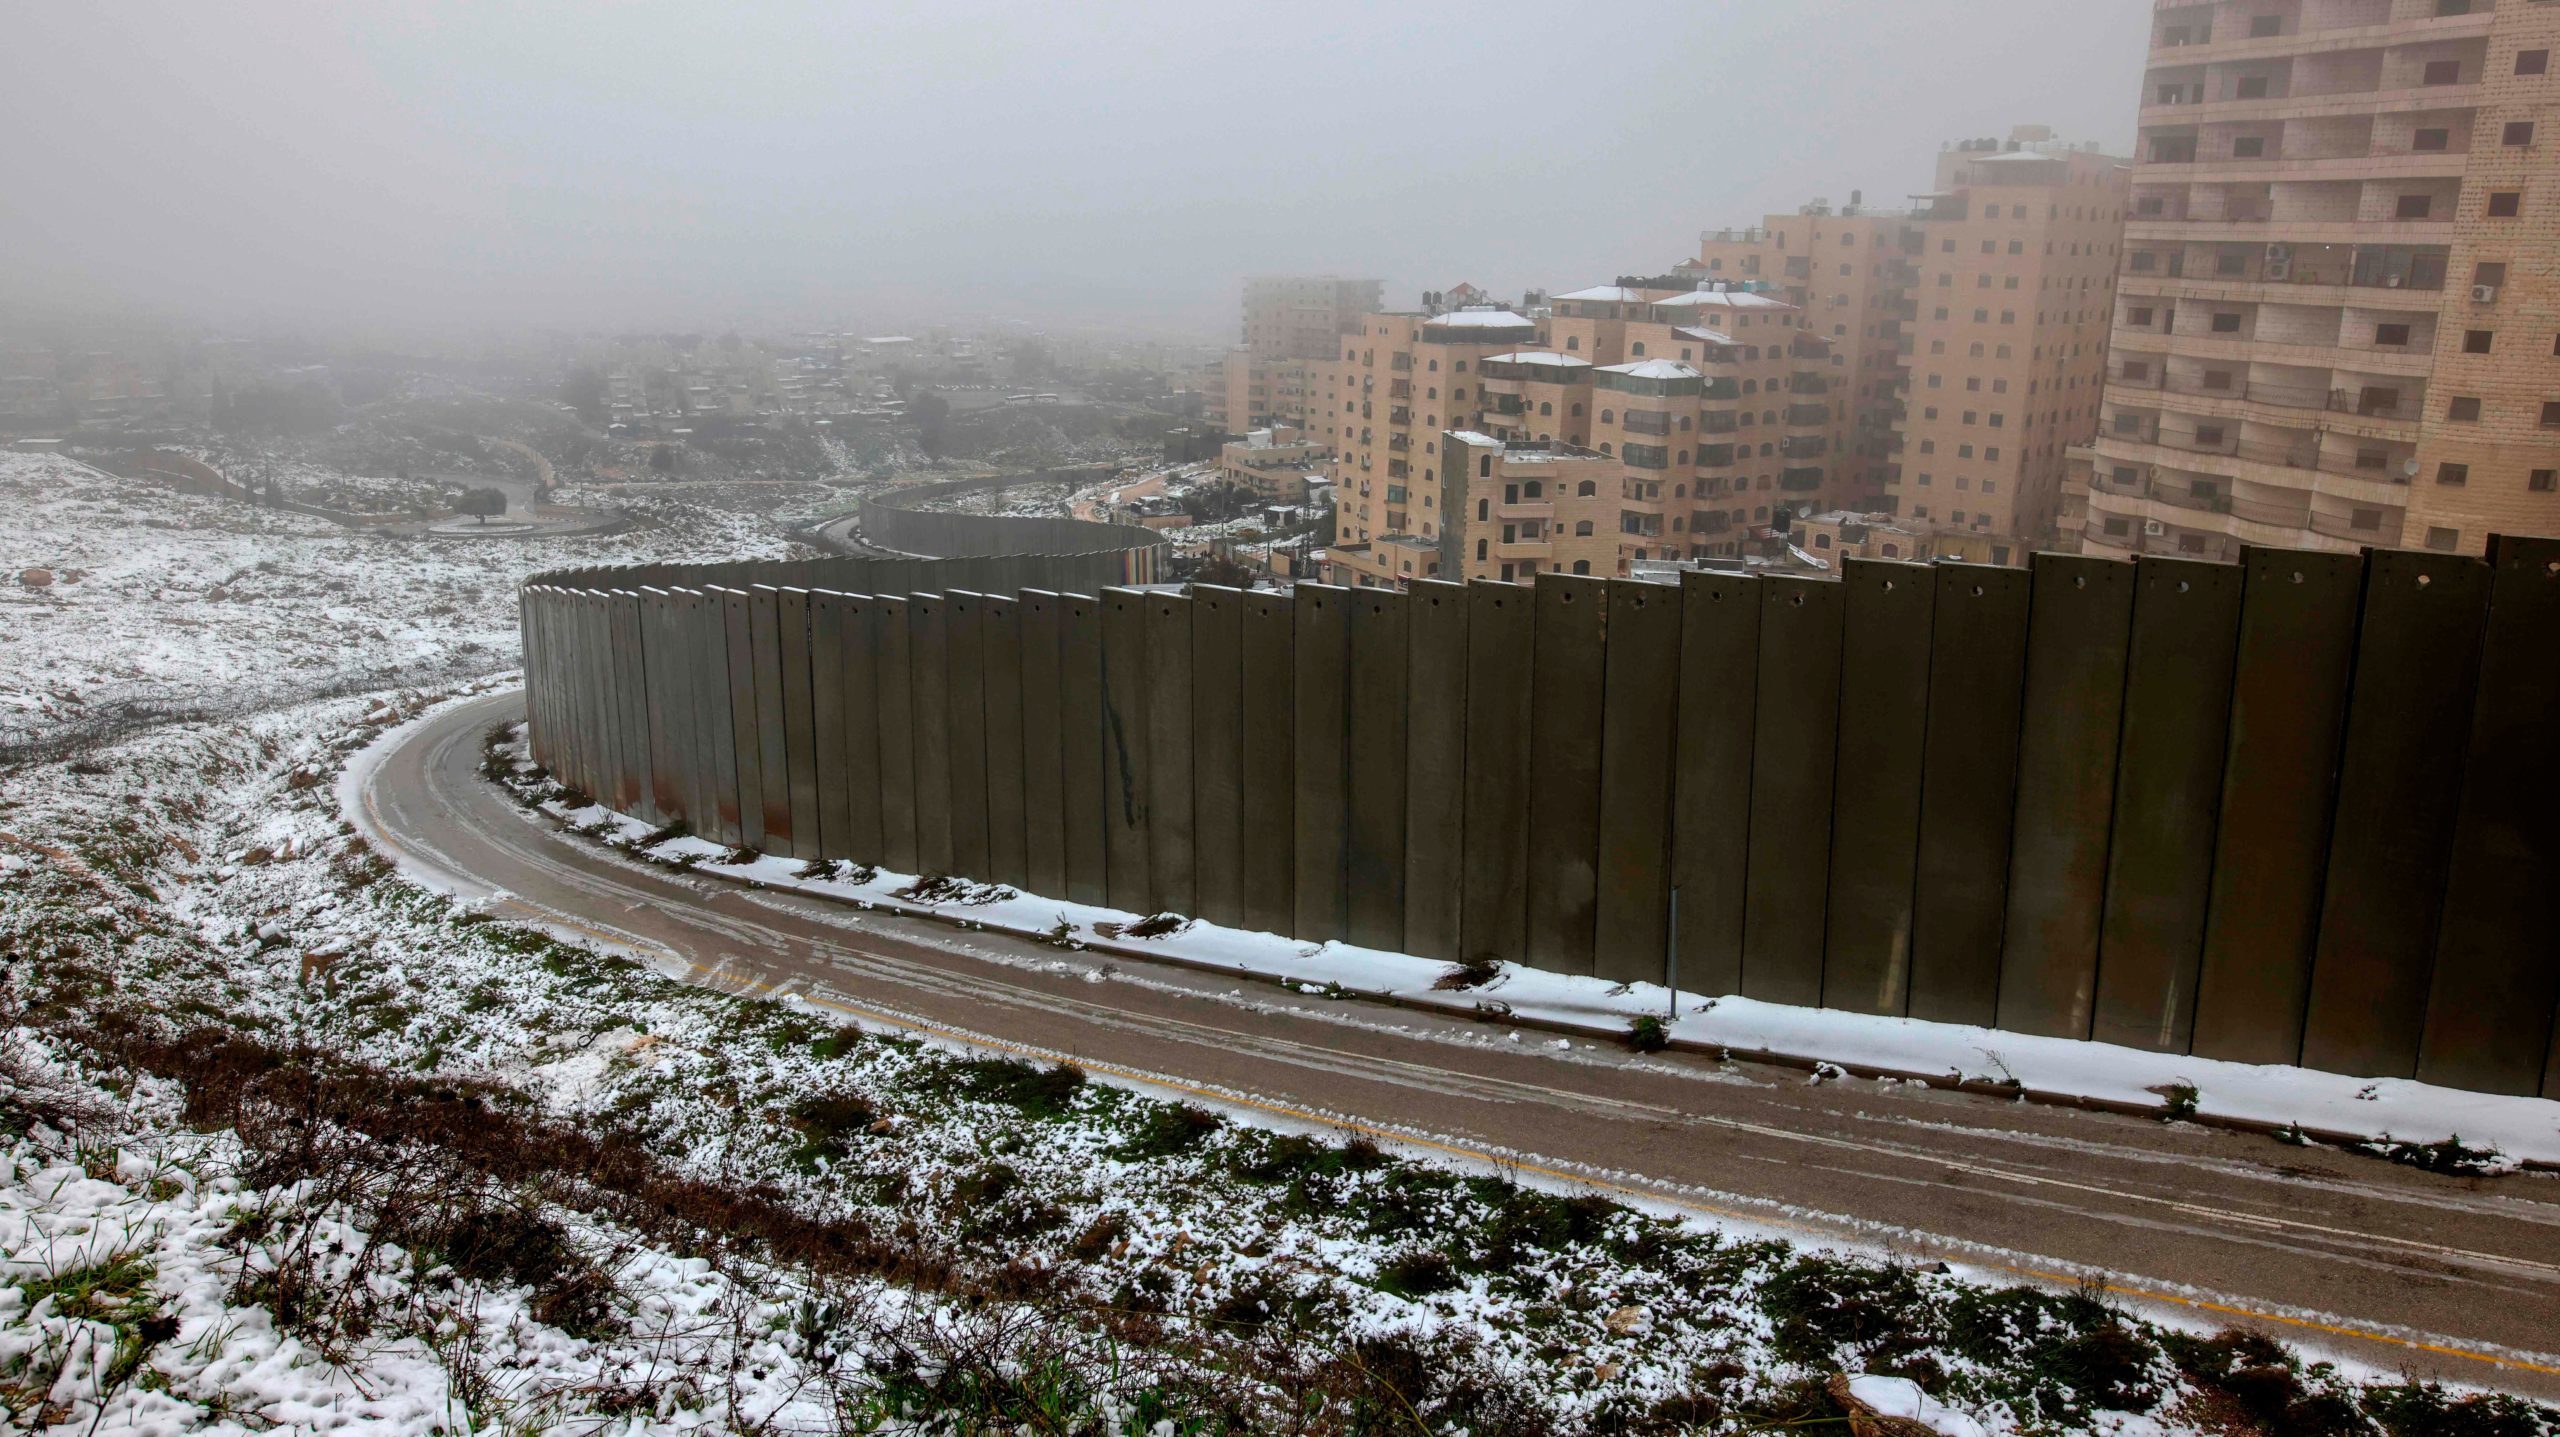 A partial view shows Israel's controversial separation wall and the Palestinian Shuafat refugee camp following heavy snowfall in the Israeli-annexed eastern sector of Jerusalem, on February 18, 2021.  (Photo: AHMAD GHARABLI, Getty Images)